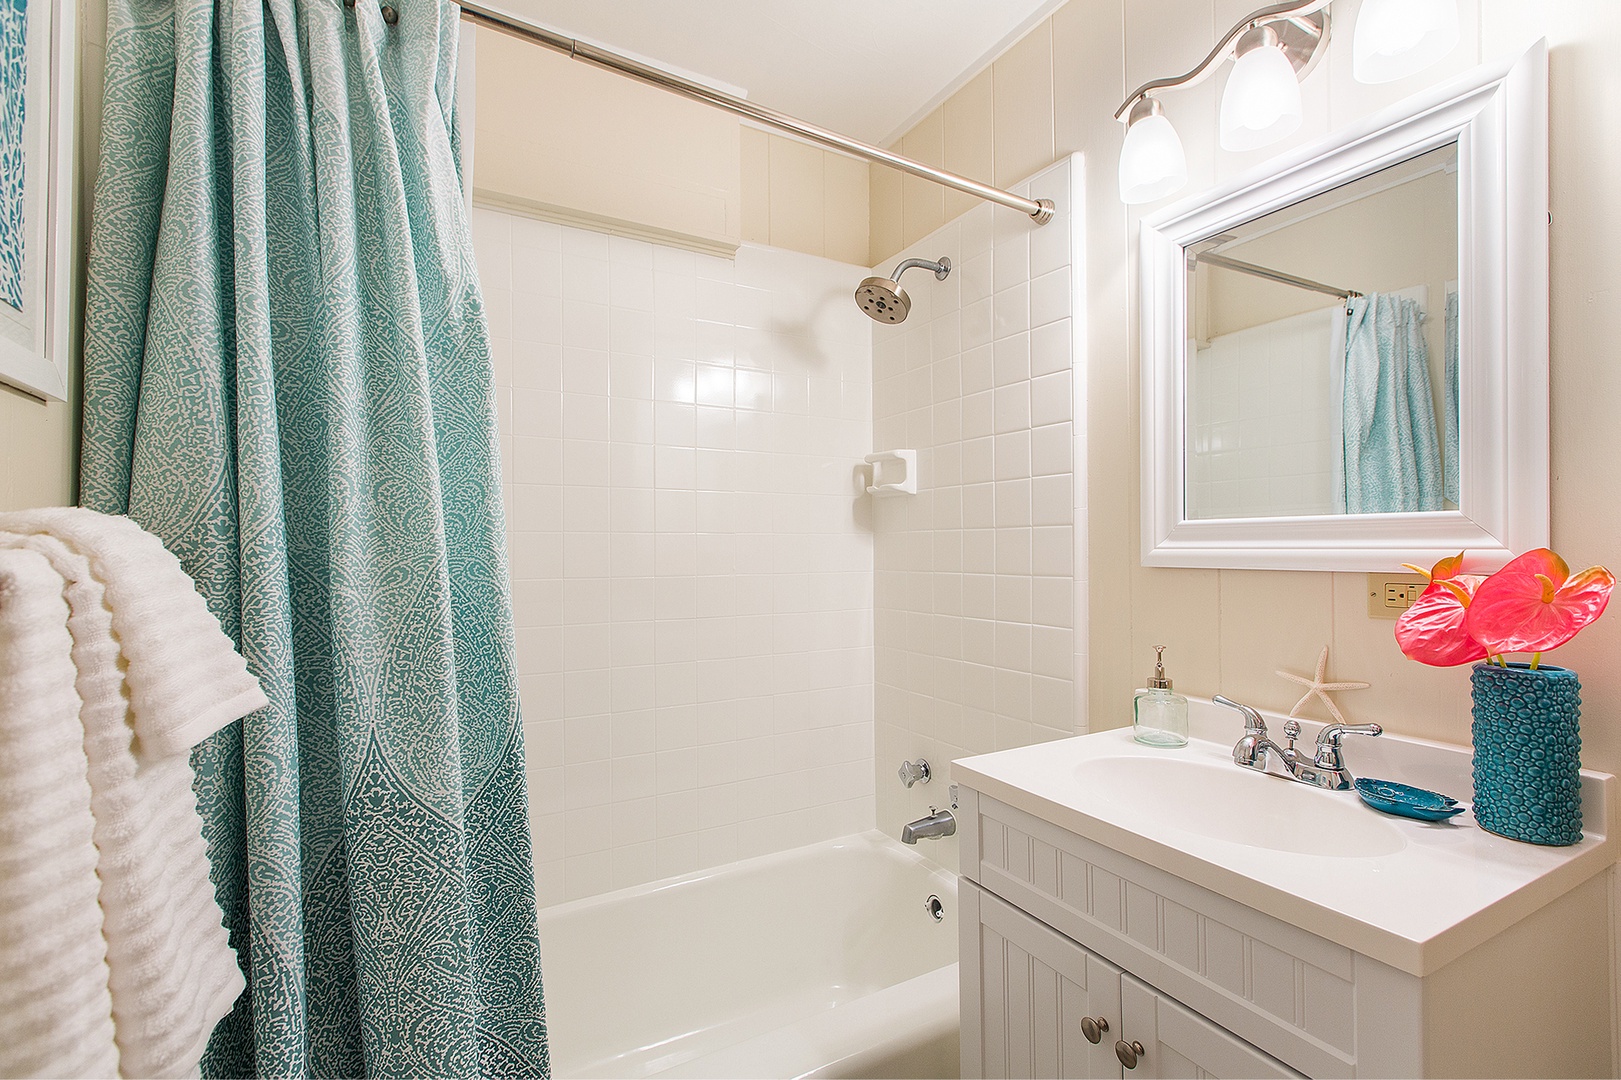 Honolulu Vacation Rentals, Kahala Cottage - Hall bathroom for primary and twin bedroom.